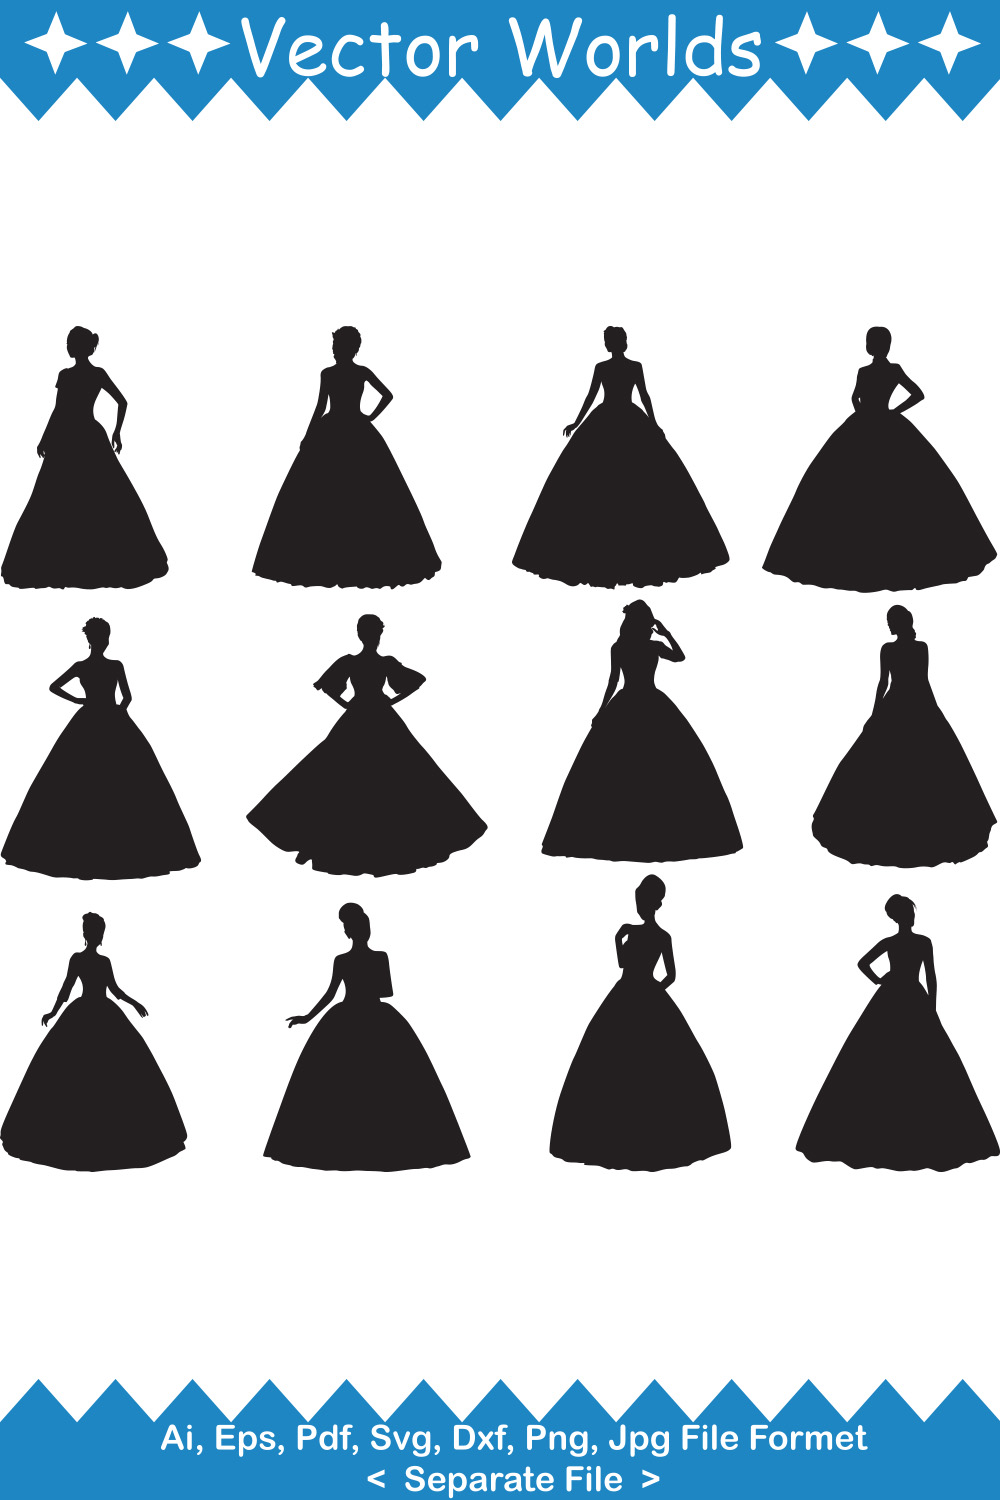 A selection of adorable images of Disney princess silhouettes